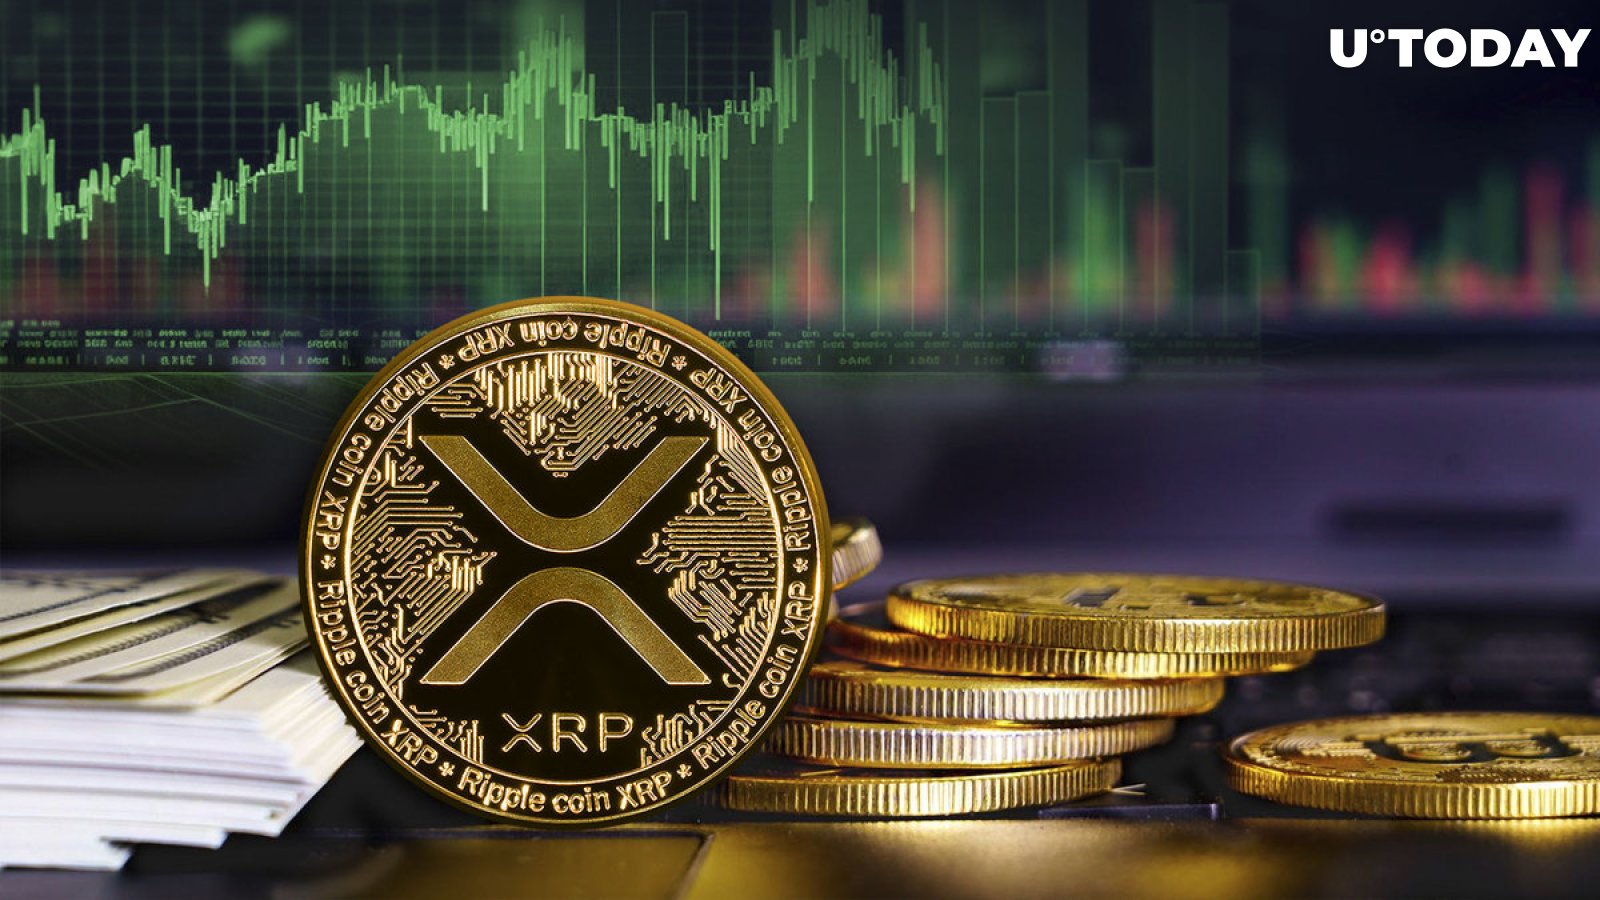 XRP jumps 9% MTD, is an important historical record in sight?